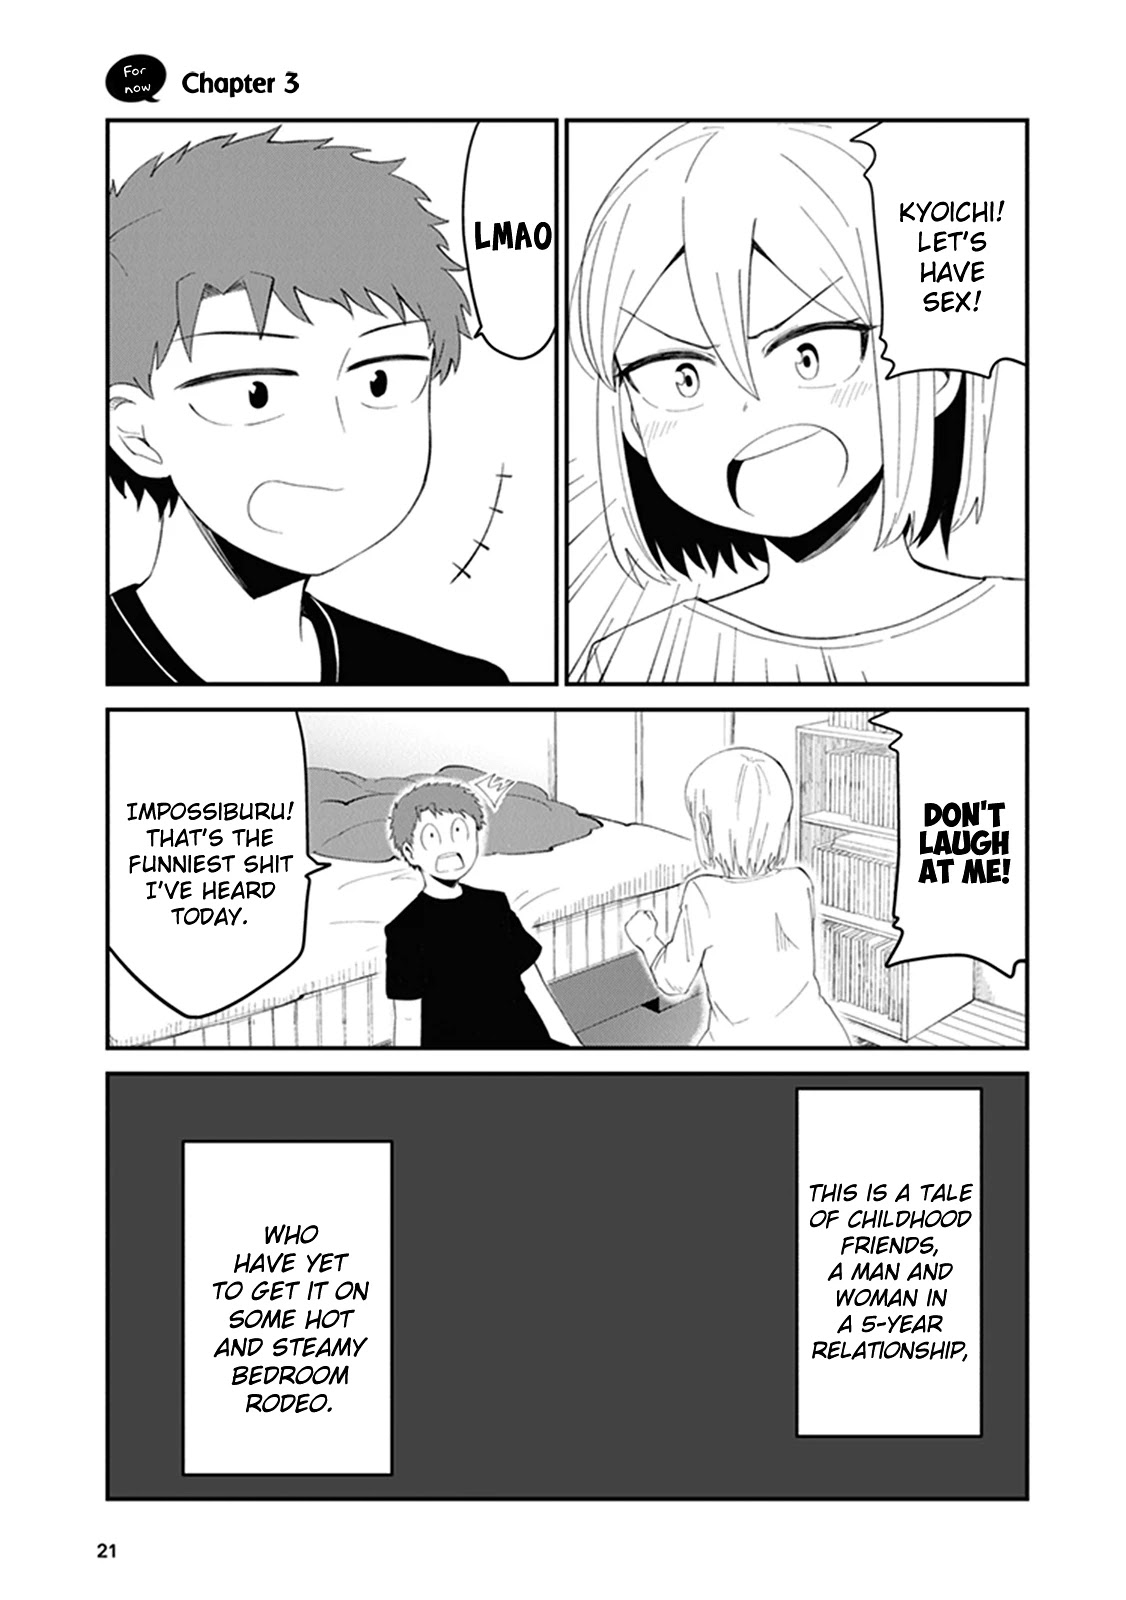 We'll Get Married Someday, But For Now - Page 1